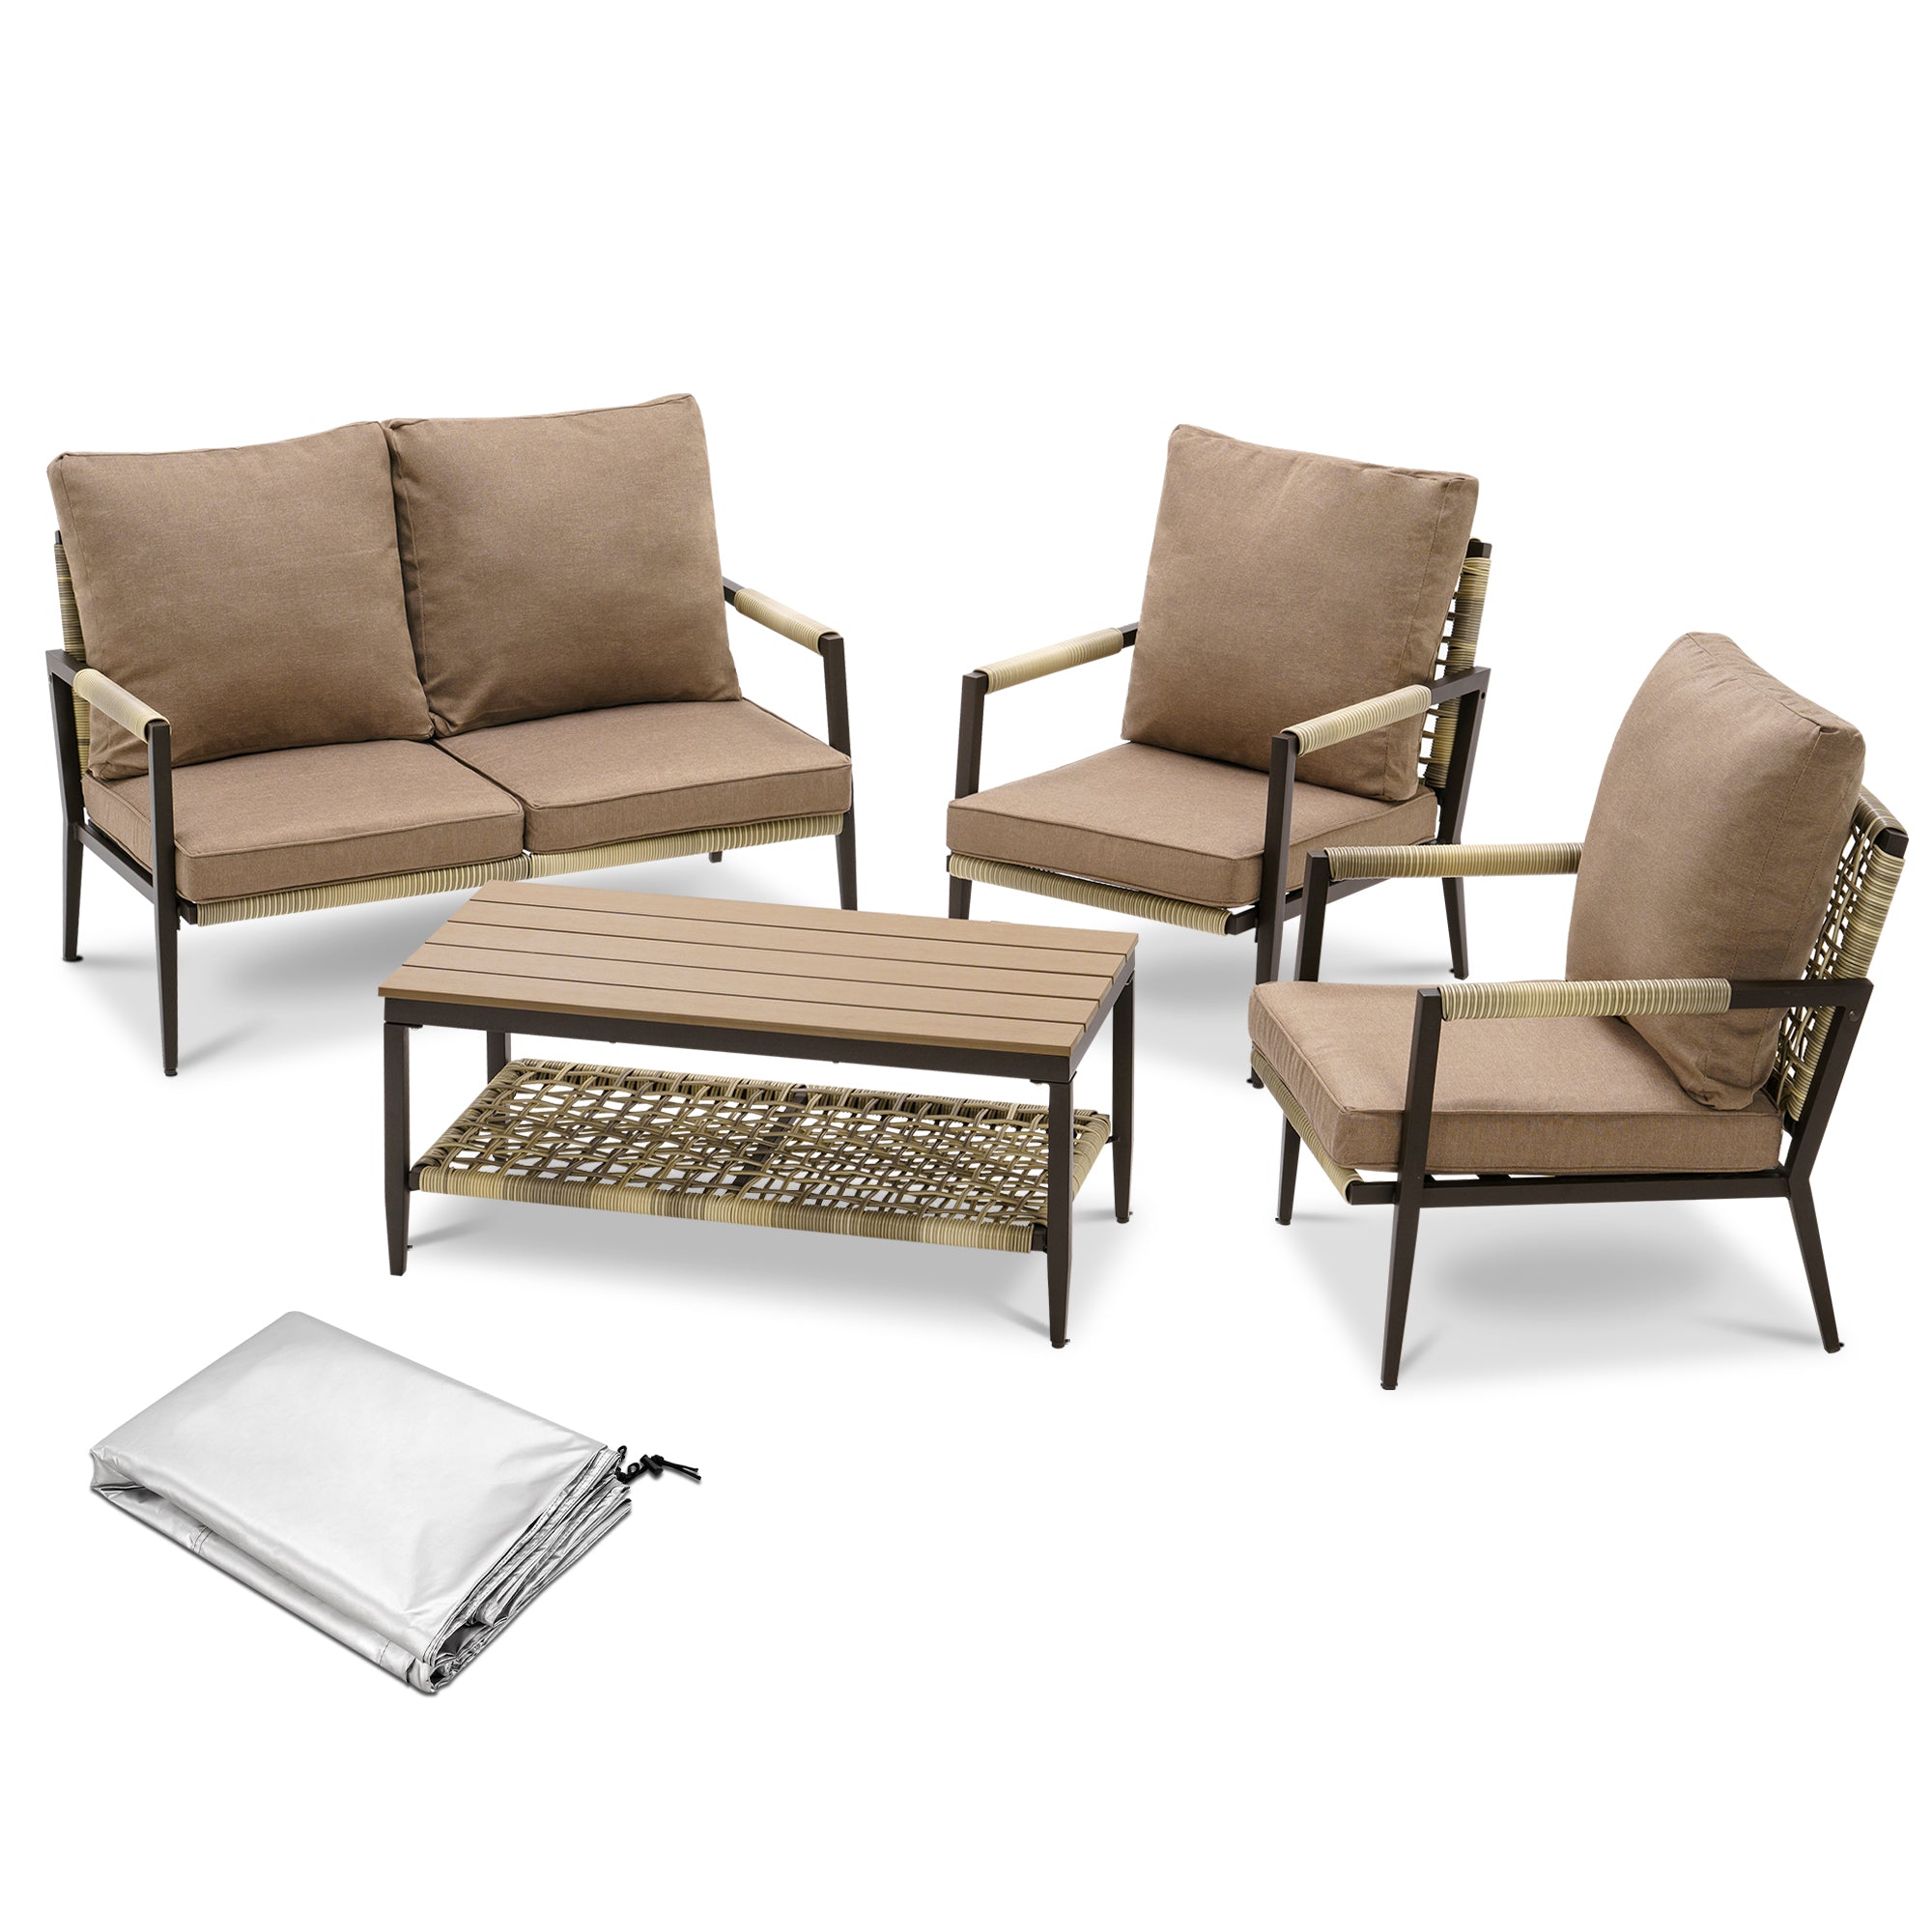 ivinta Outdoor Patio Furniture Set, 4 Pieces Rattan Conversation Sets , Wicker Patio Furniture Sets, All Weather Sectional Furniture Cushions（Beige/Grey）